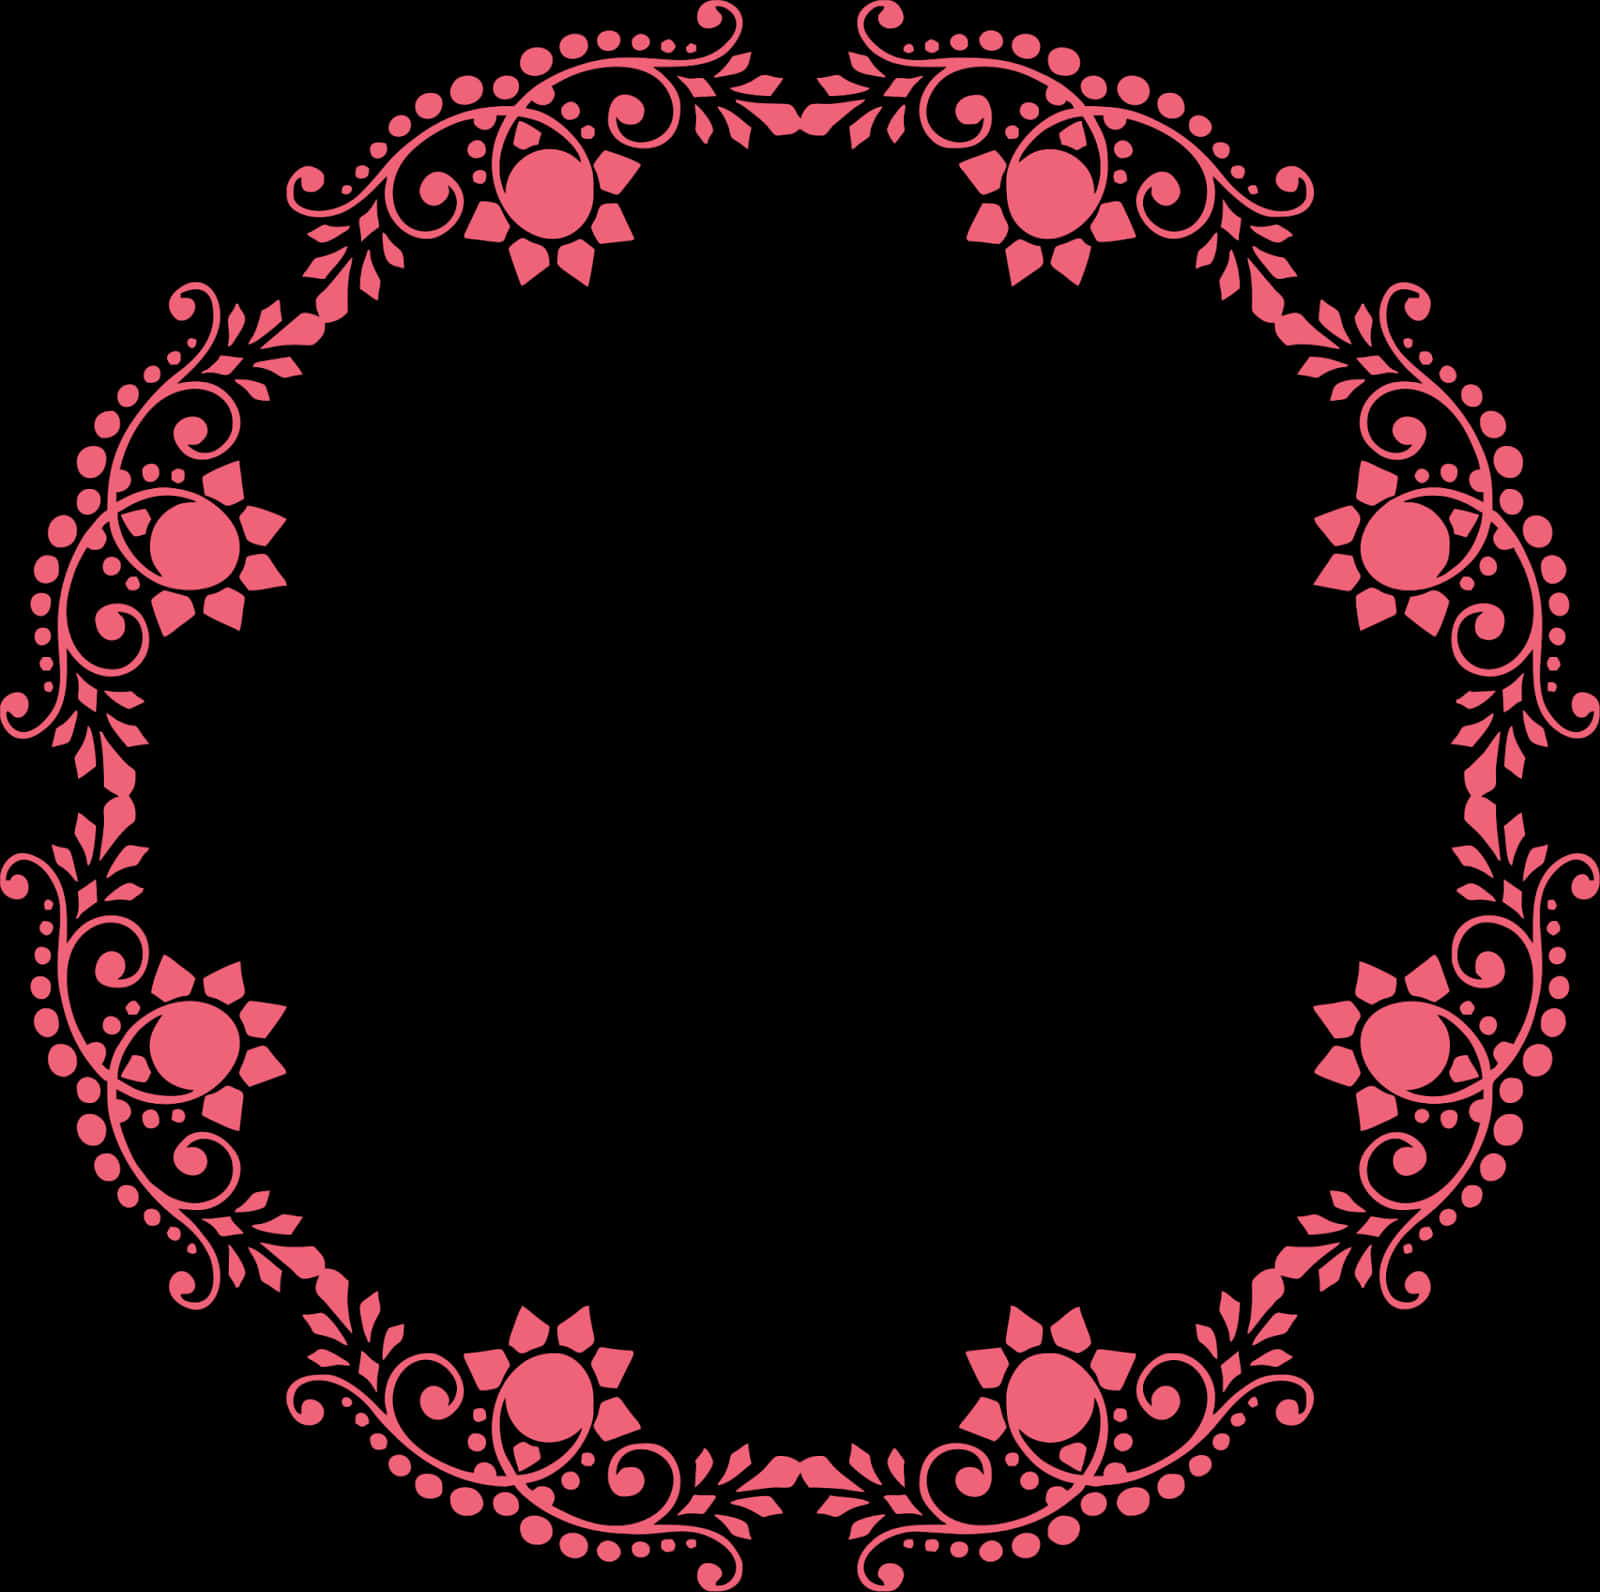 A Circular Design With Flowers And Leaves